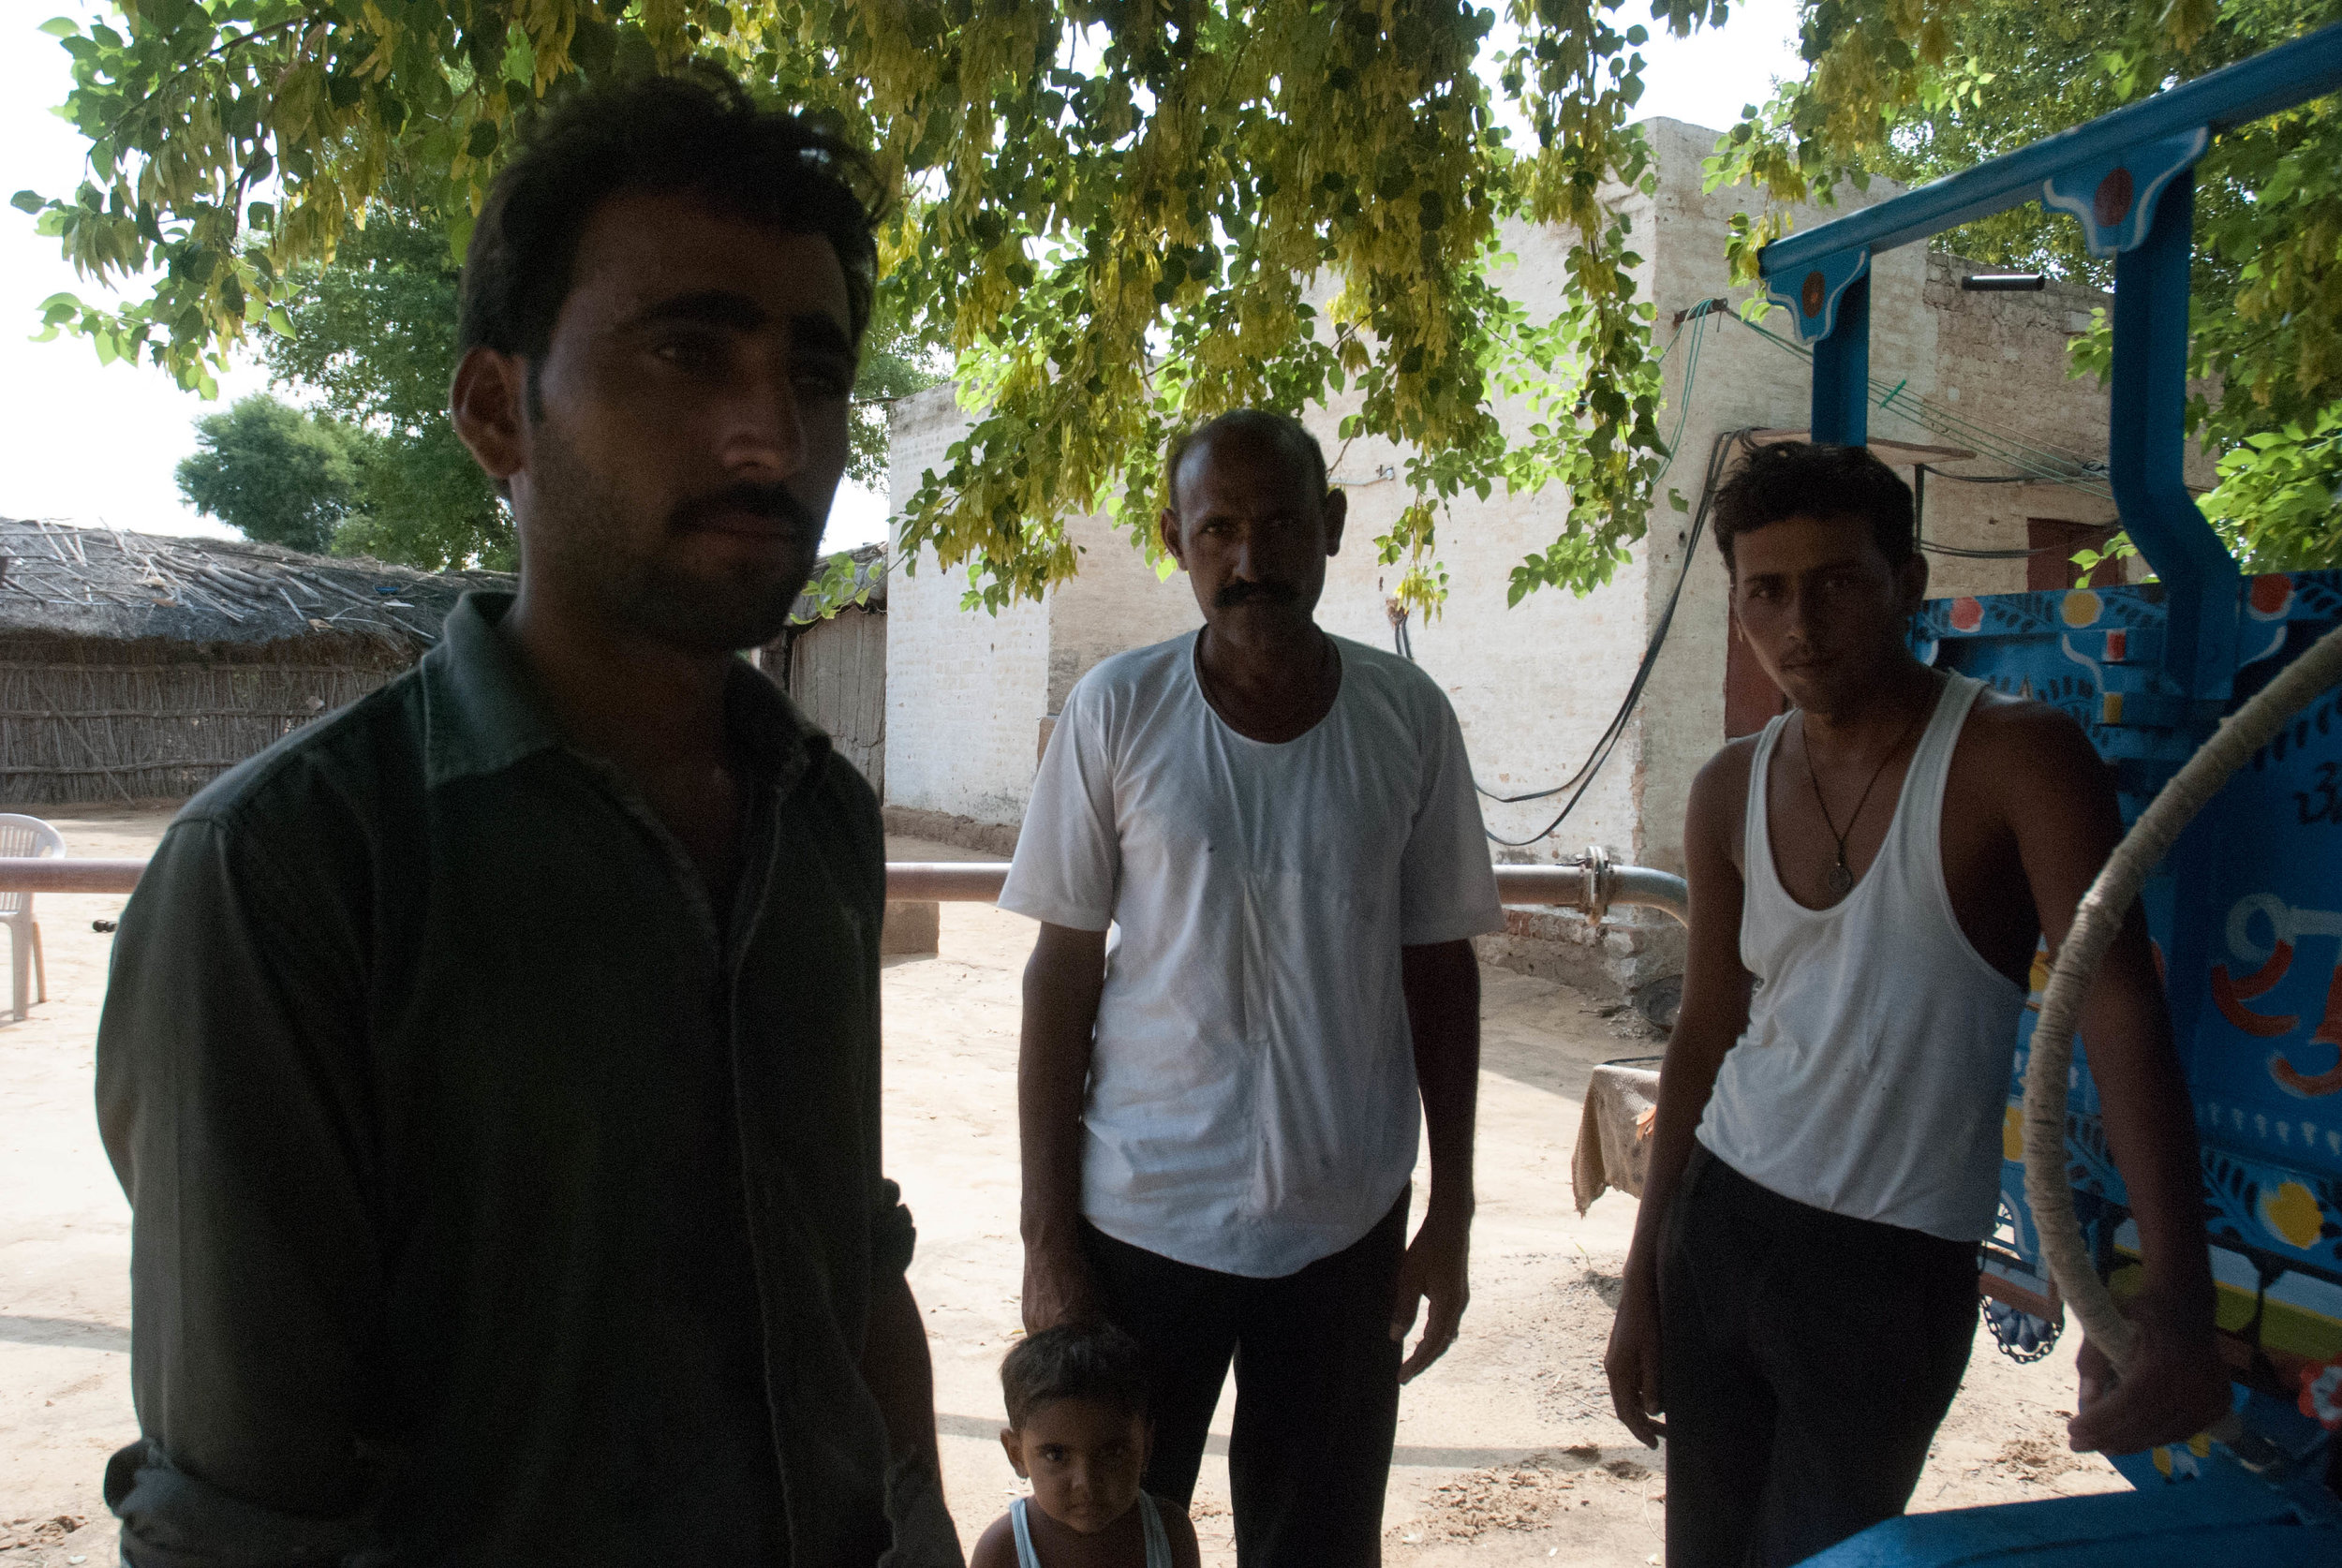  The men of the Siddh family. The father (in the back) works on the farm while his two sons work as tractor drivers. 